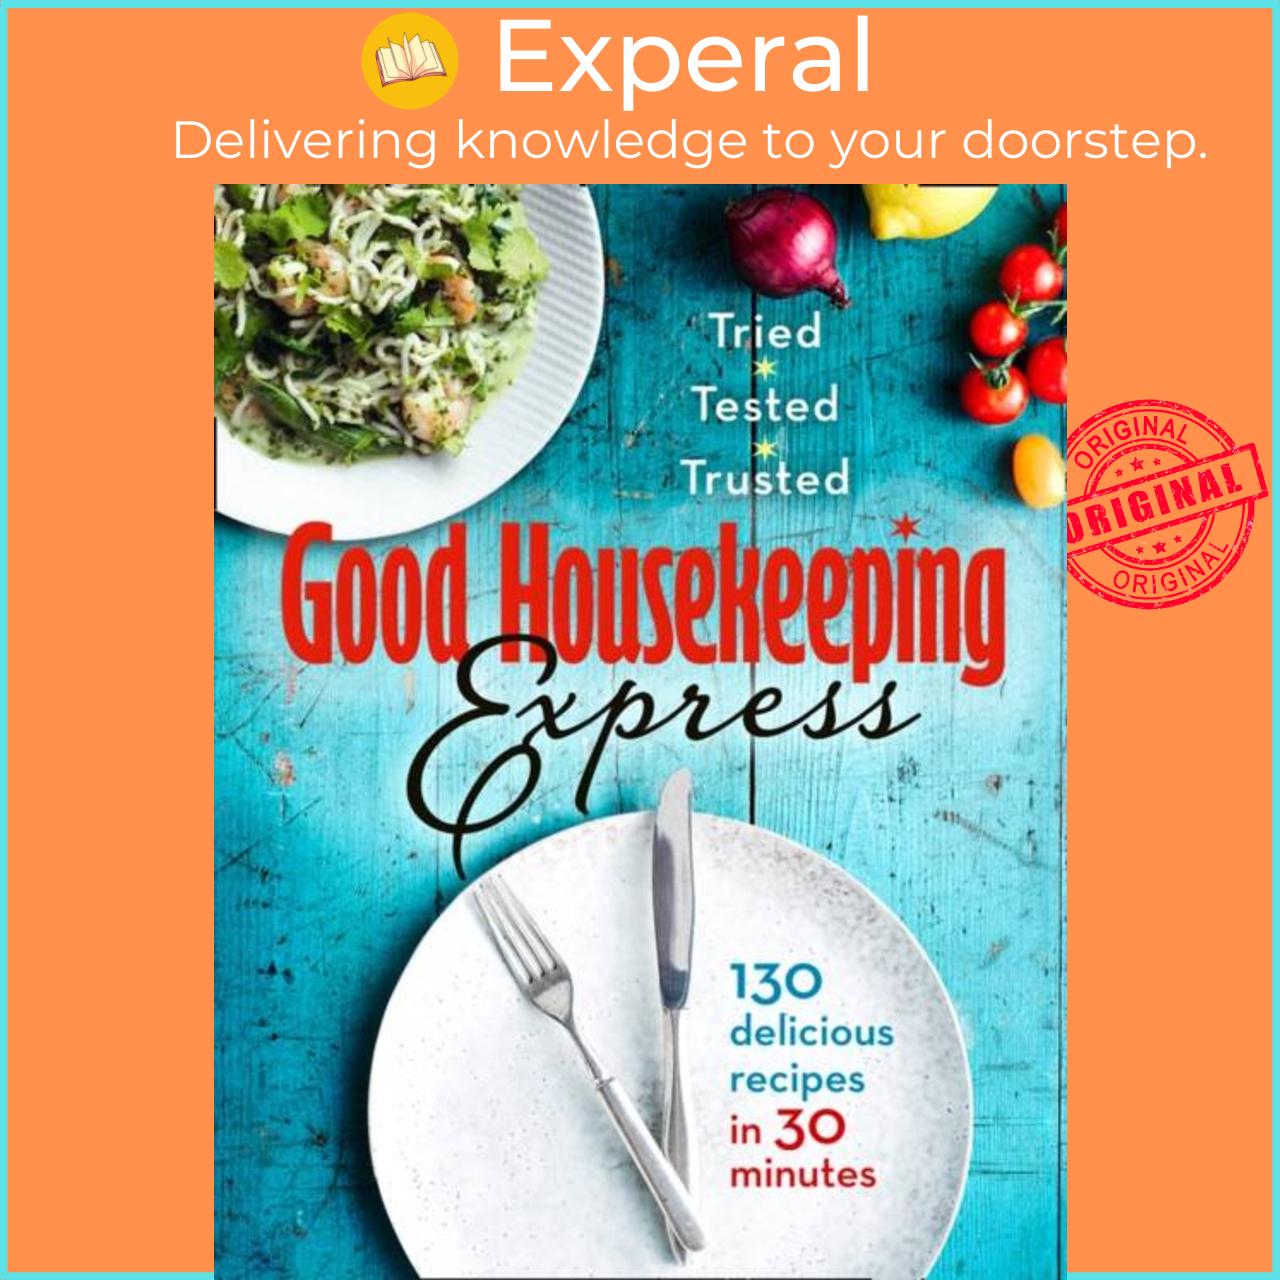 Sách - Good Housekeeping Express by Good Housekeeping (UK edition, hardcover)